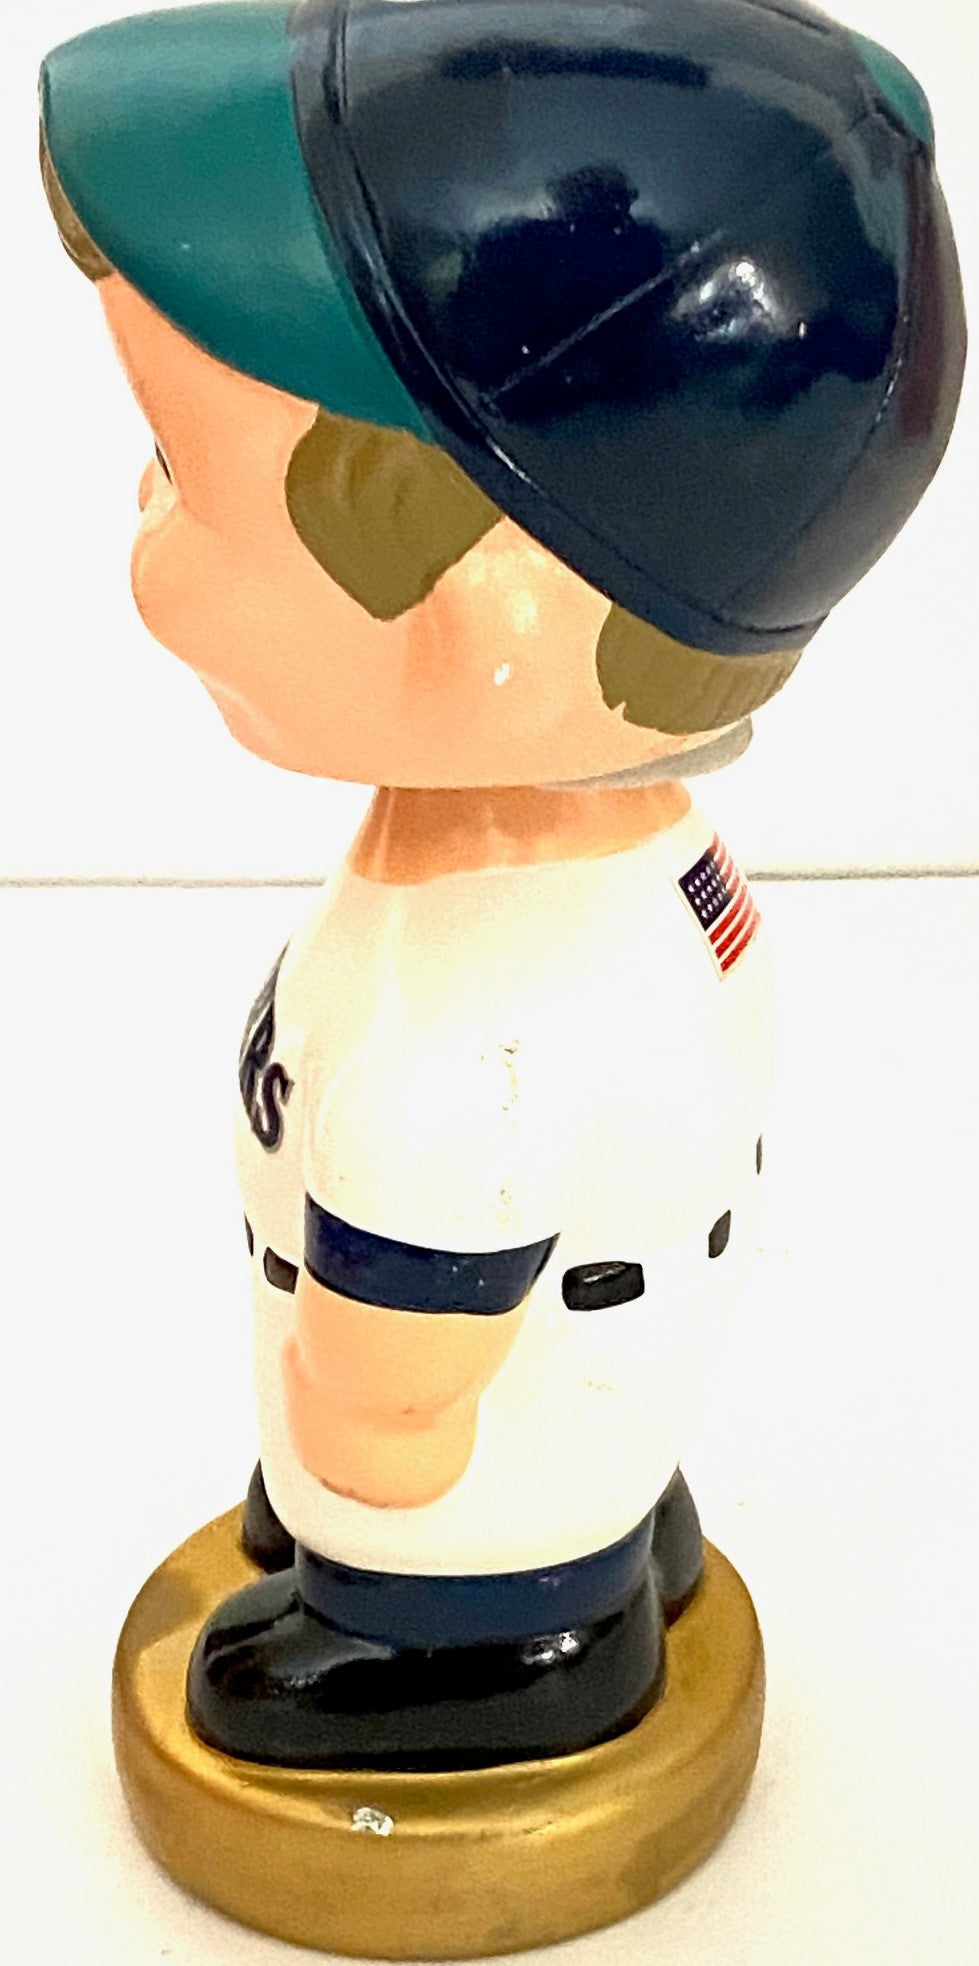 Seattle Mariners 2002 MLB "Boy" Bobblehead (New w/blemishes) by Twins Enterprise